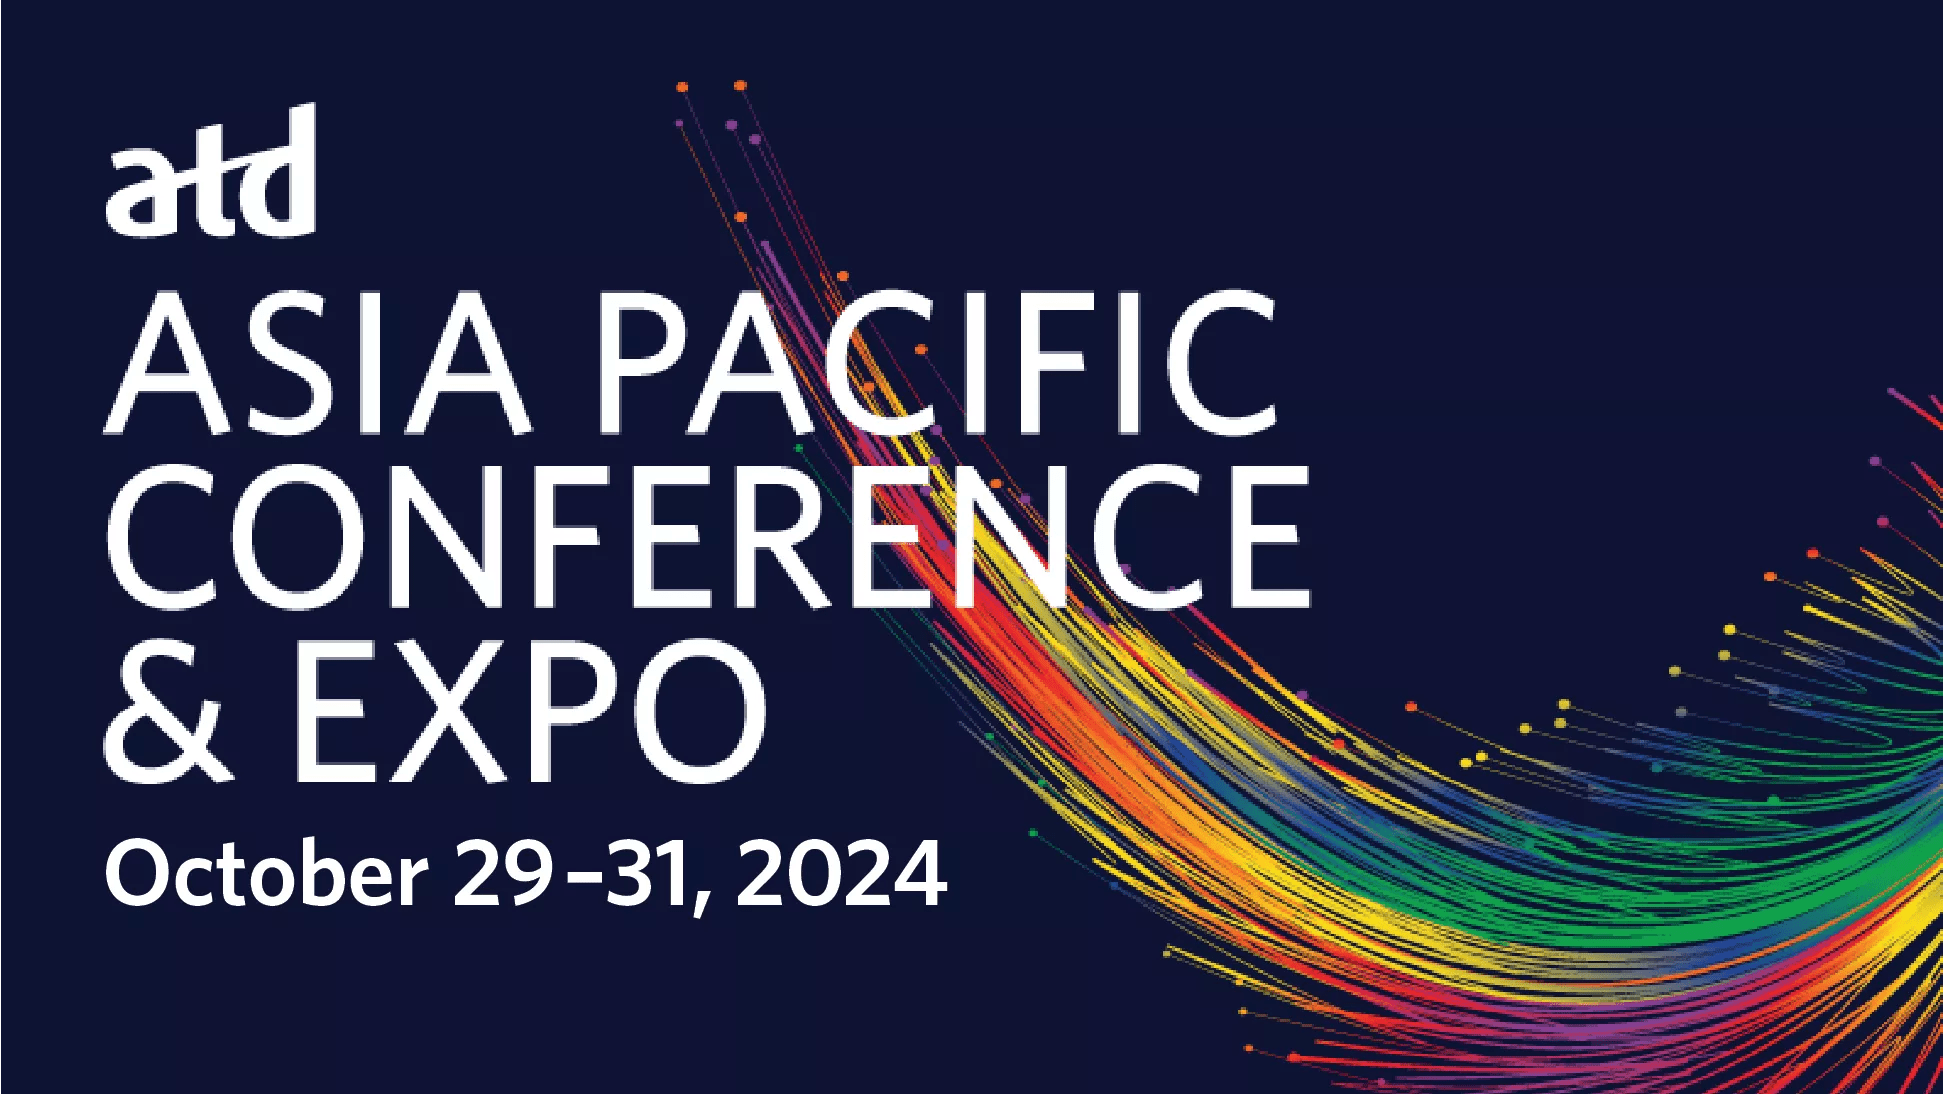 ATD-ASIA-PACIFIC-CONFERENCE-EXPO-2024